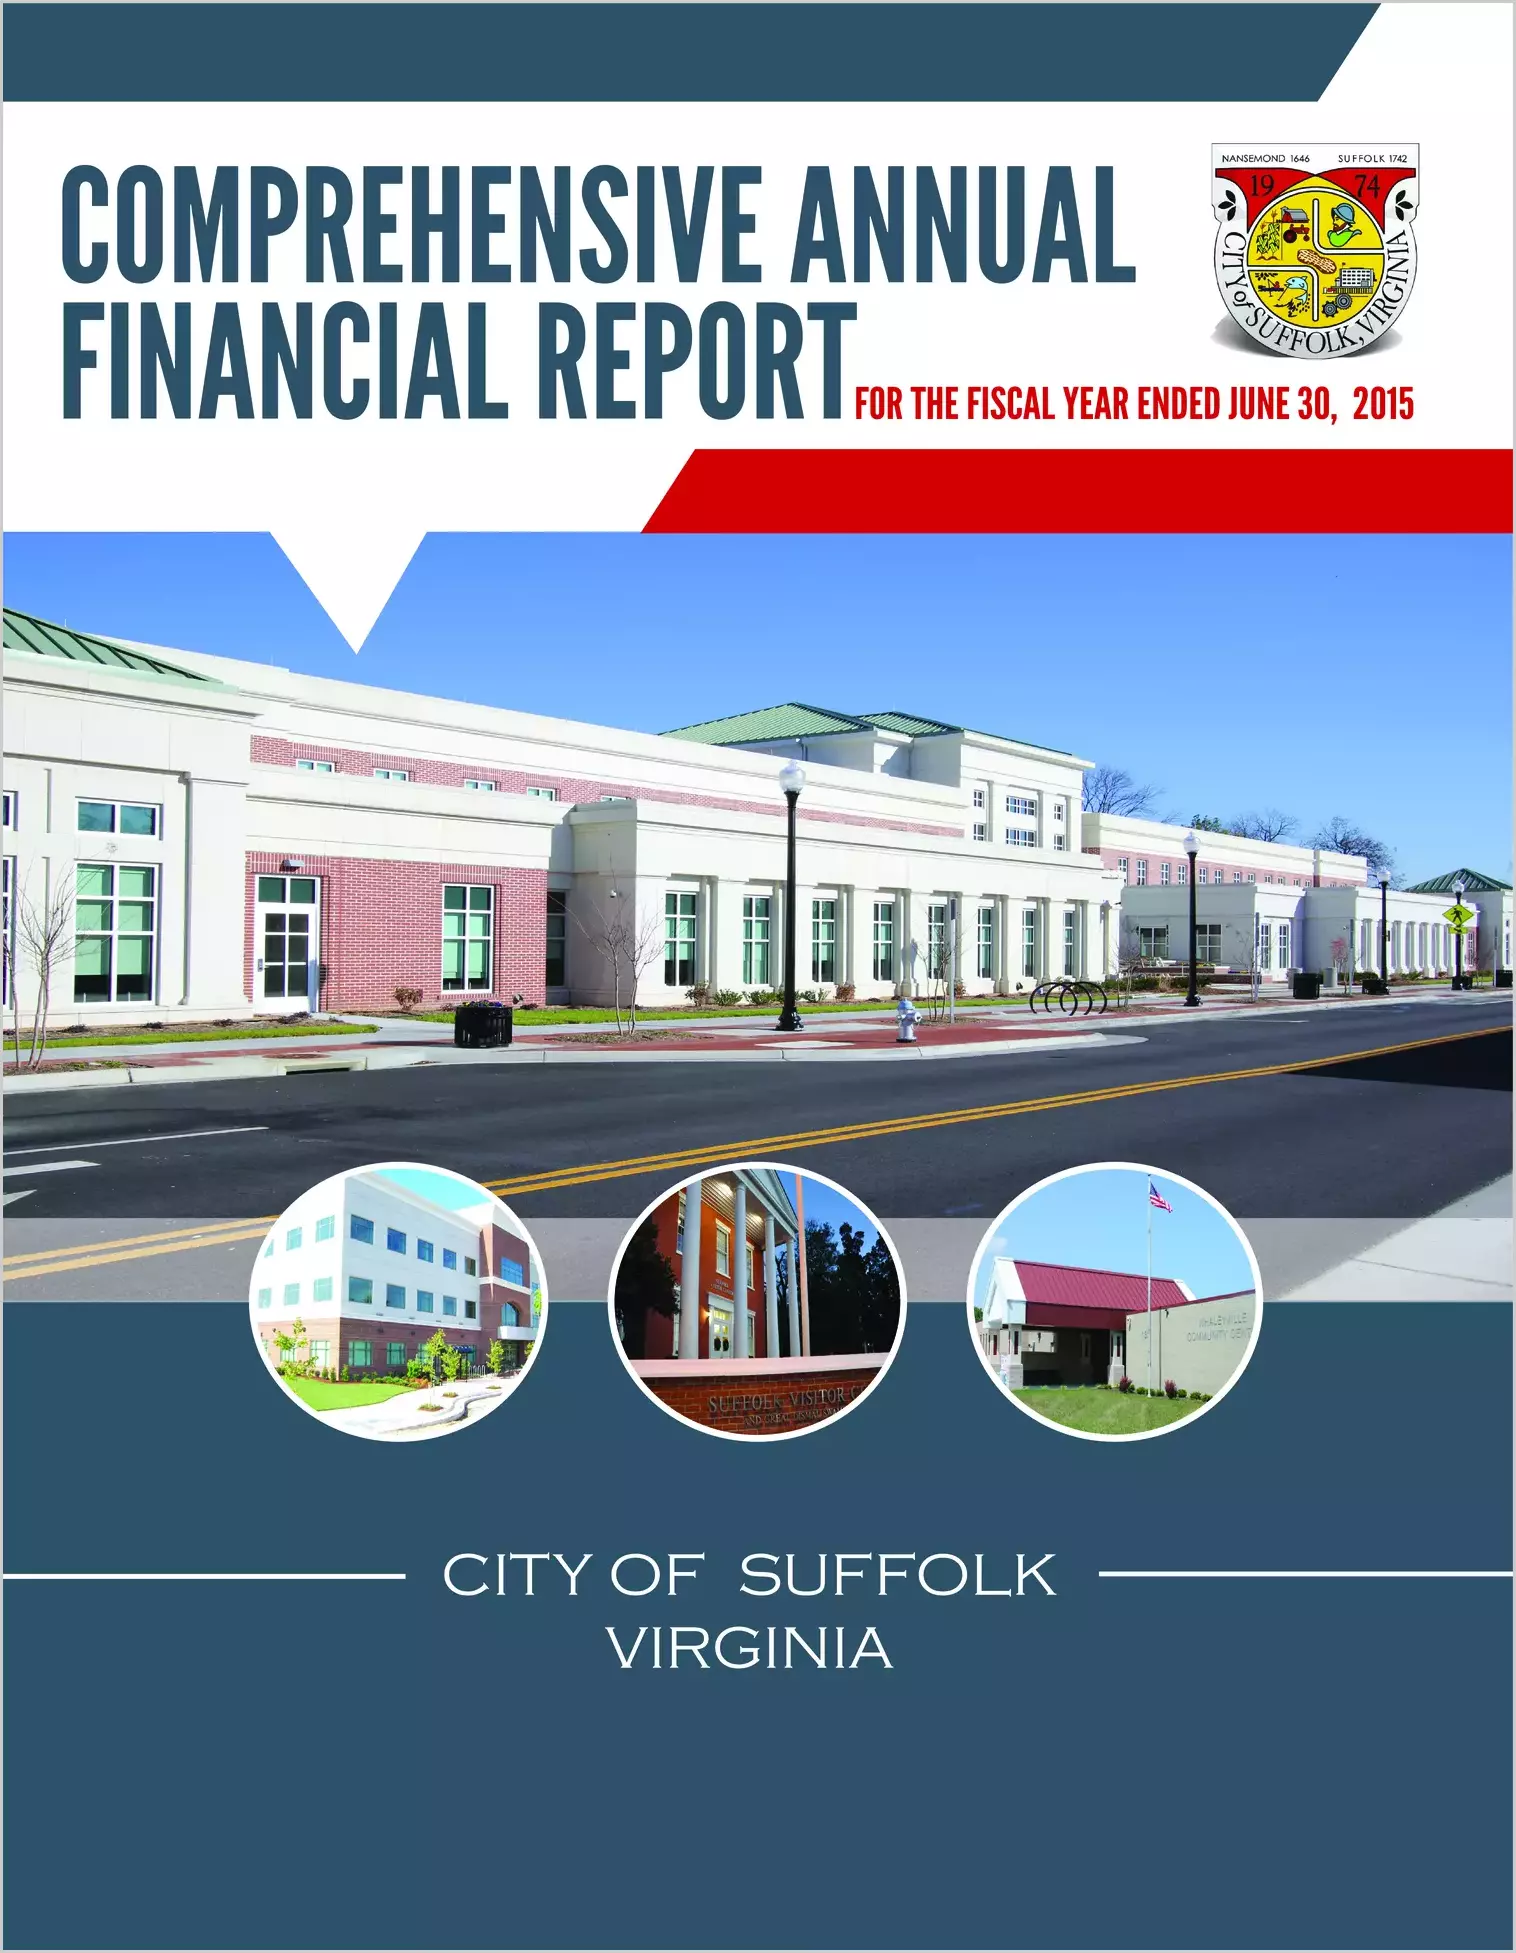 2015 Annual Financial Report for City of Suffolk